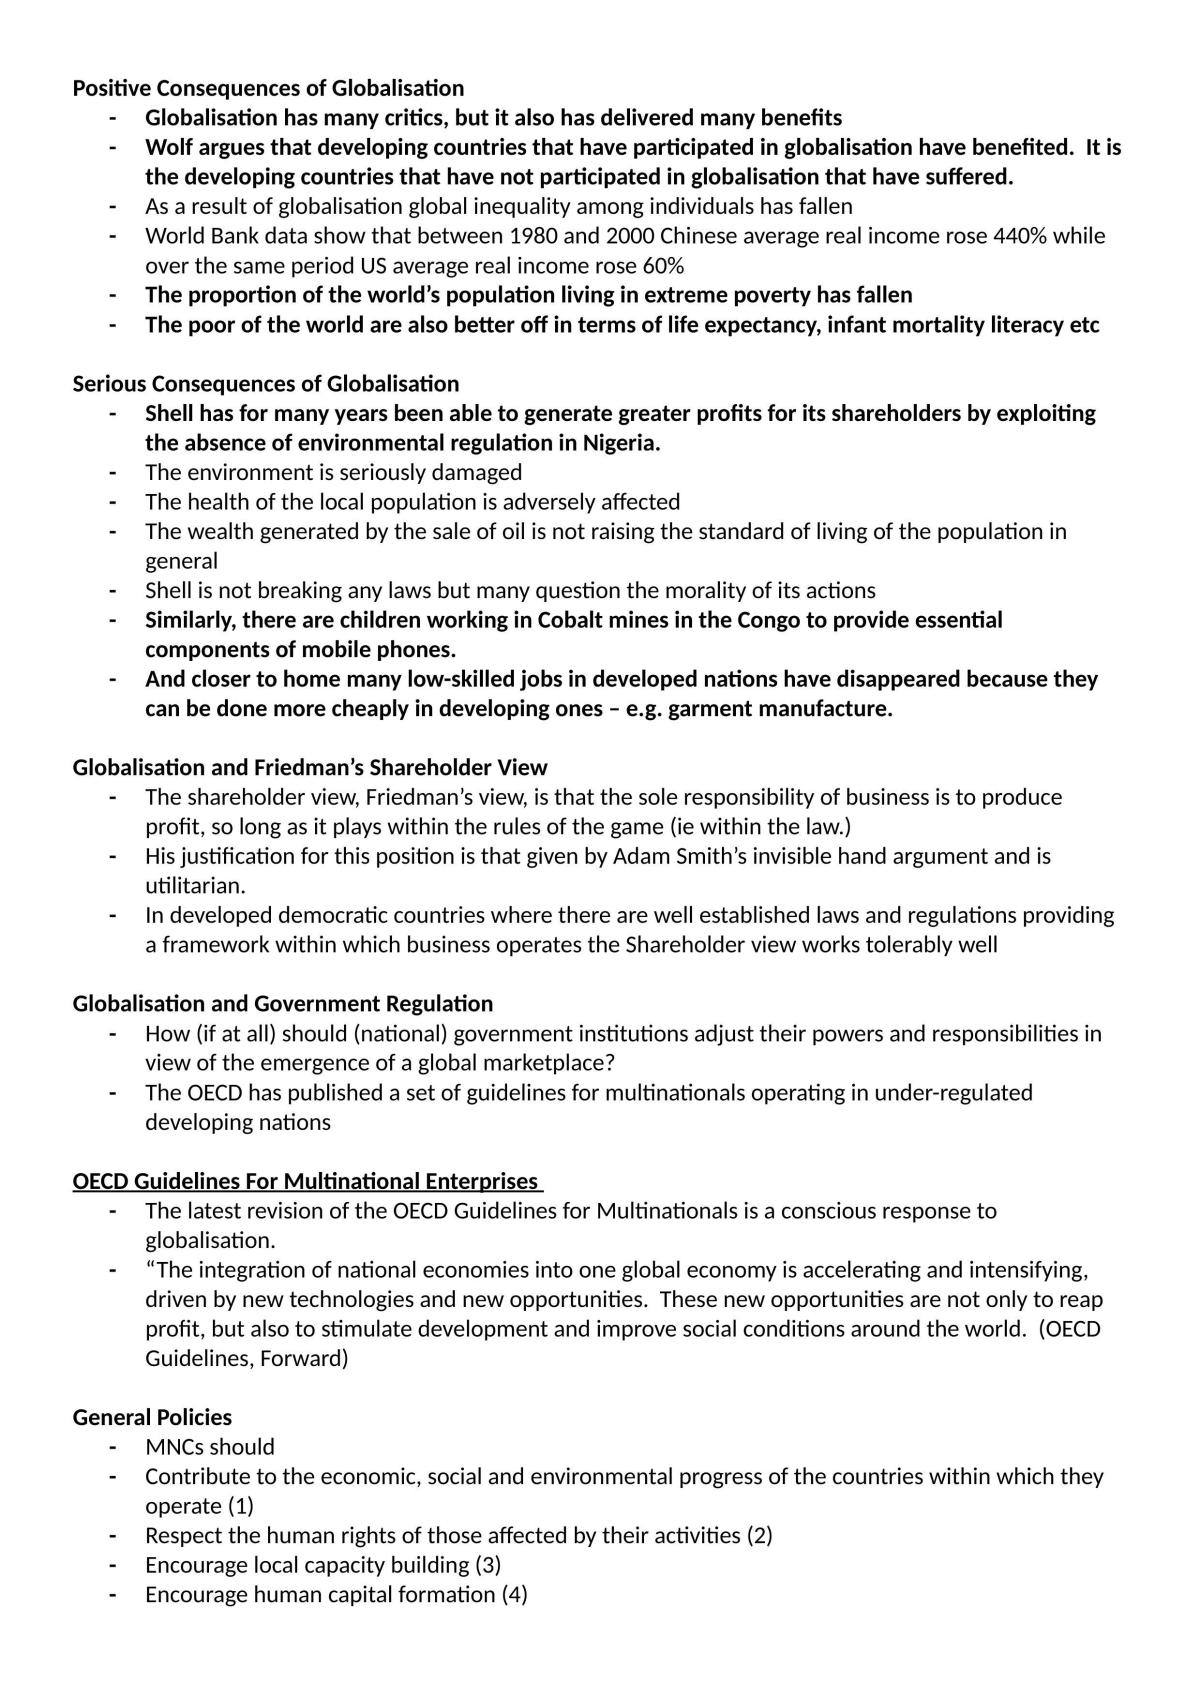 Corporate Social Responsibility and Business Ethic Notes - Page 11